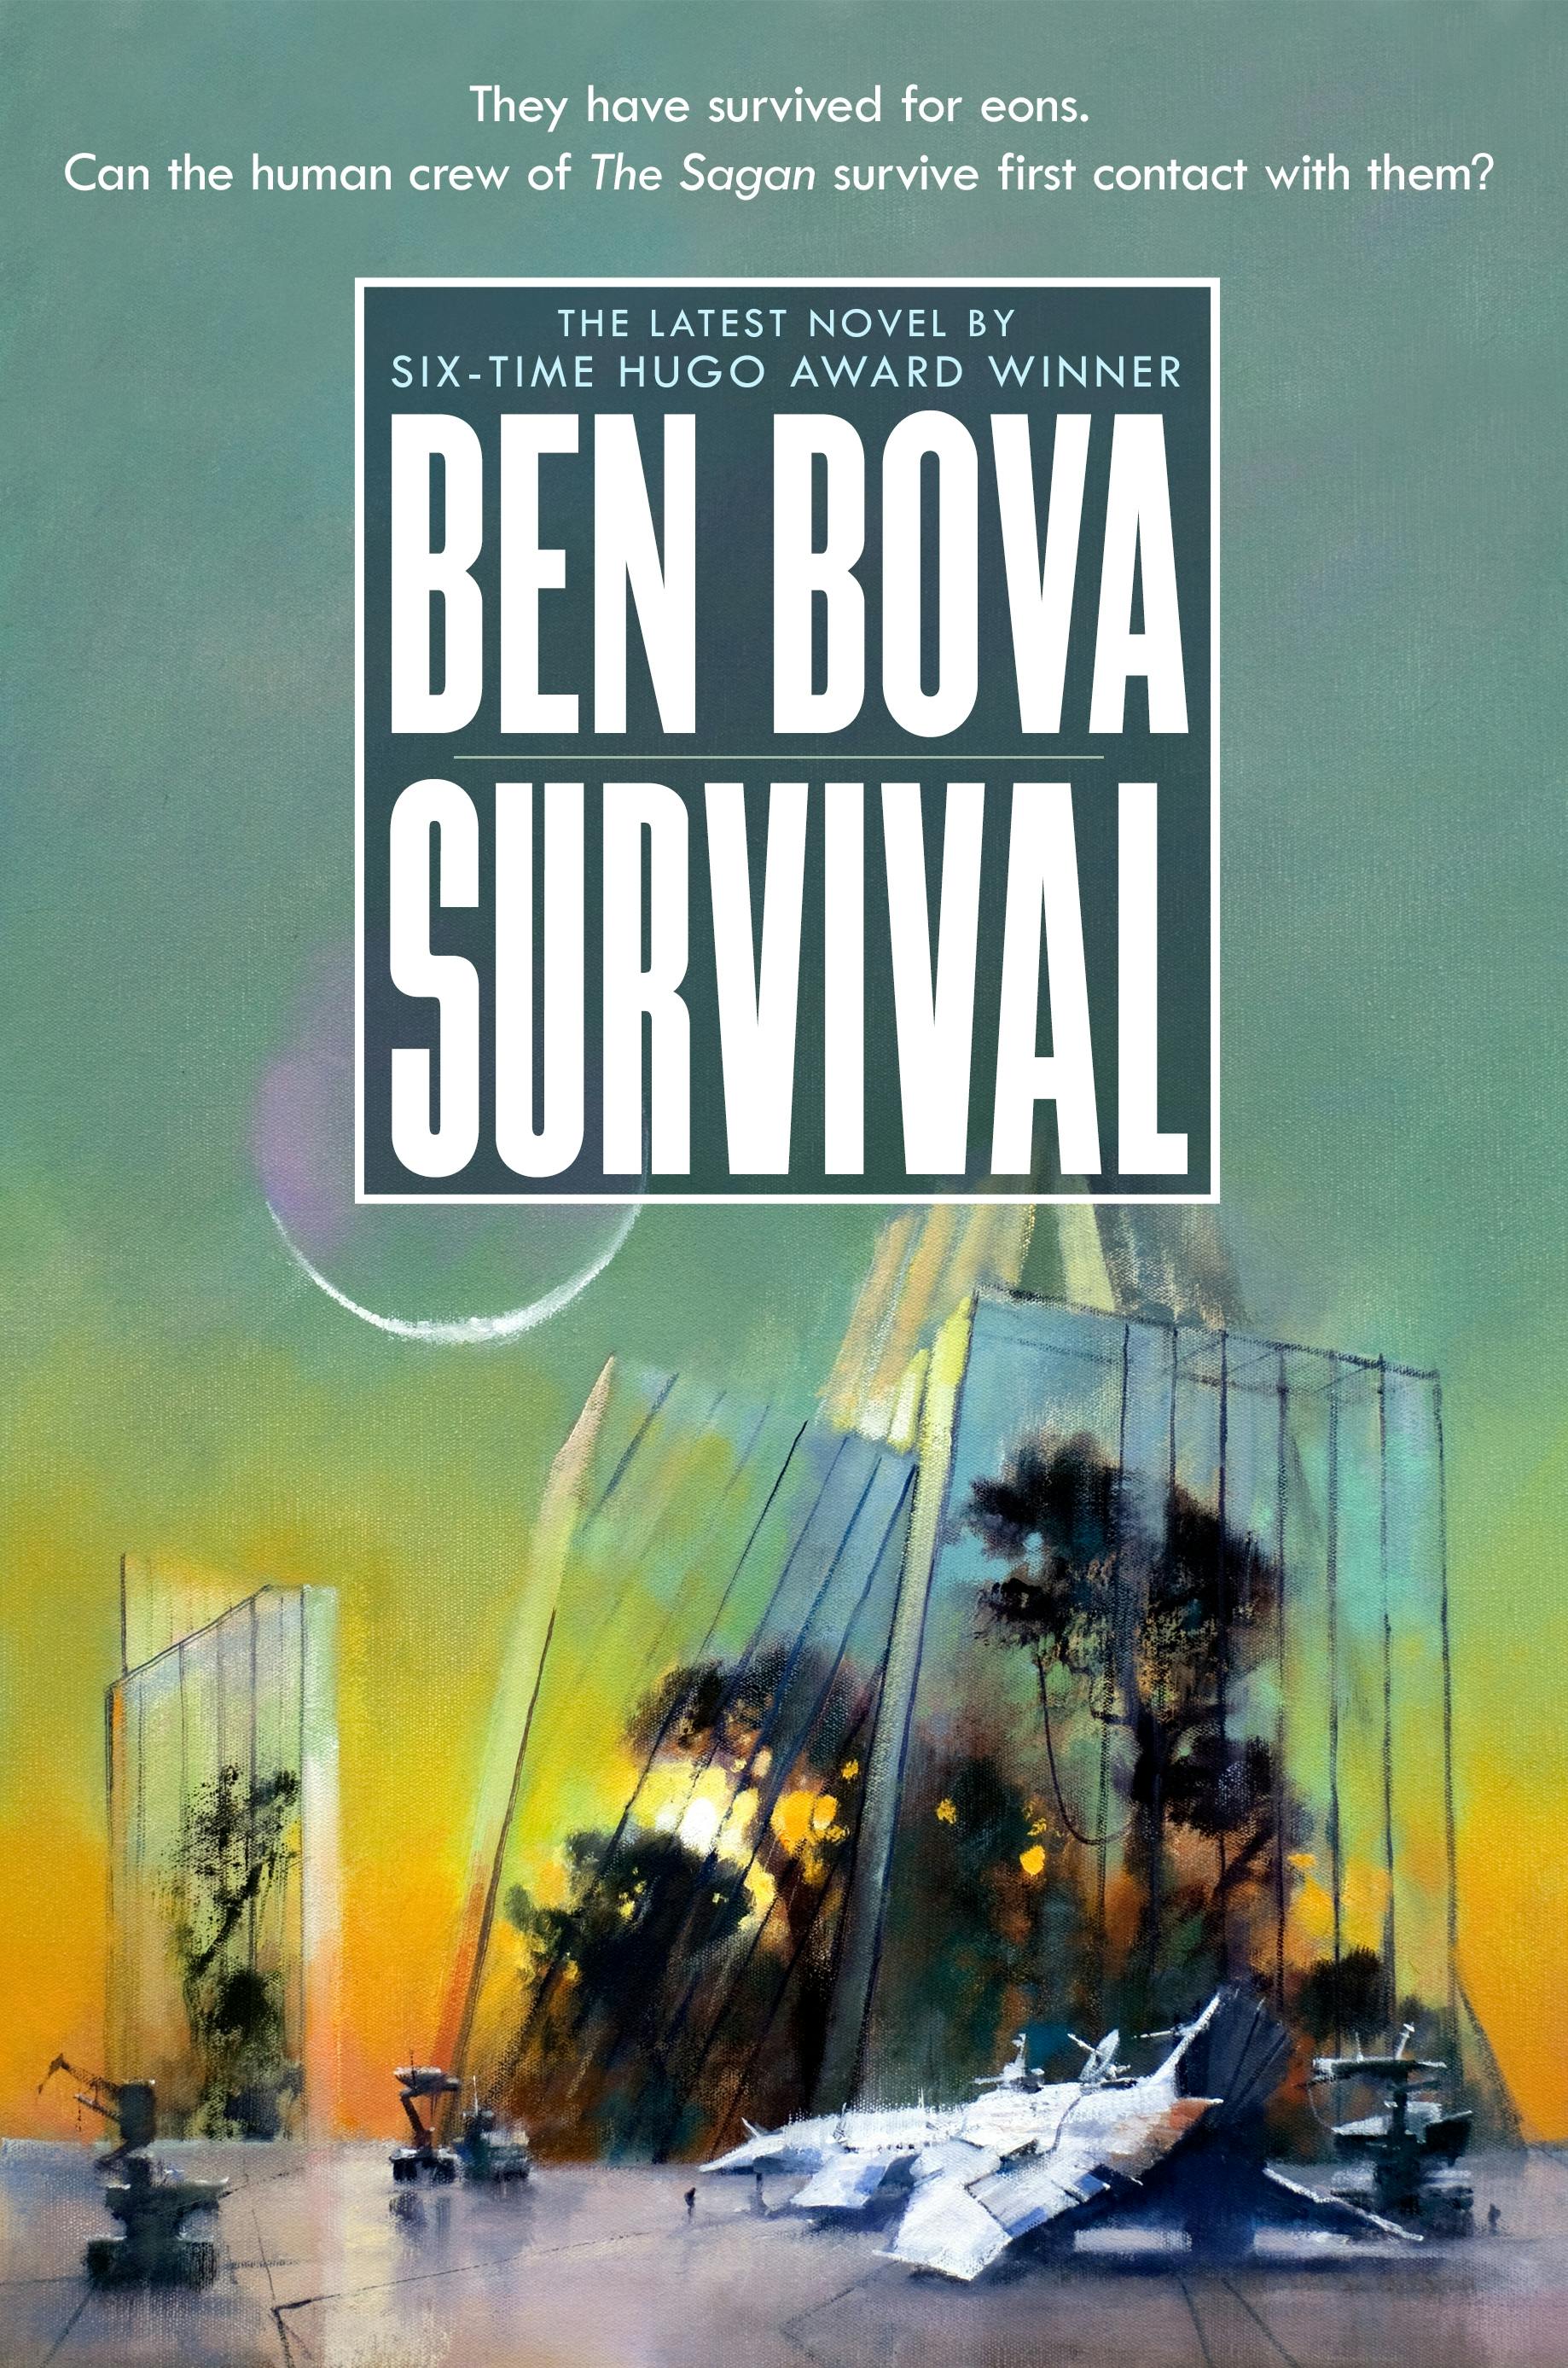 Cover for the book titled as: Survival